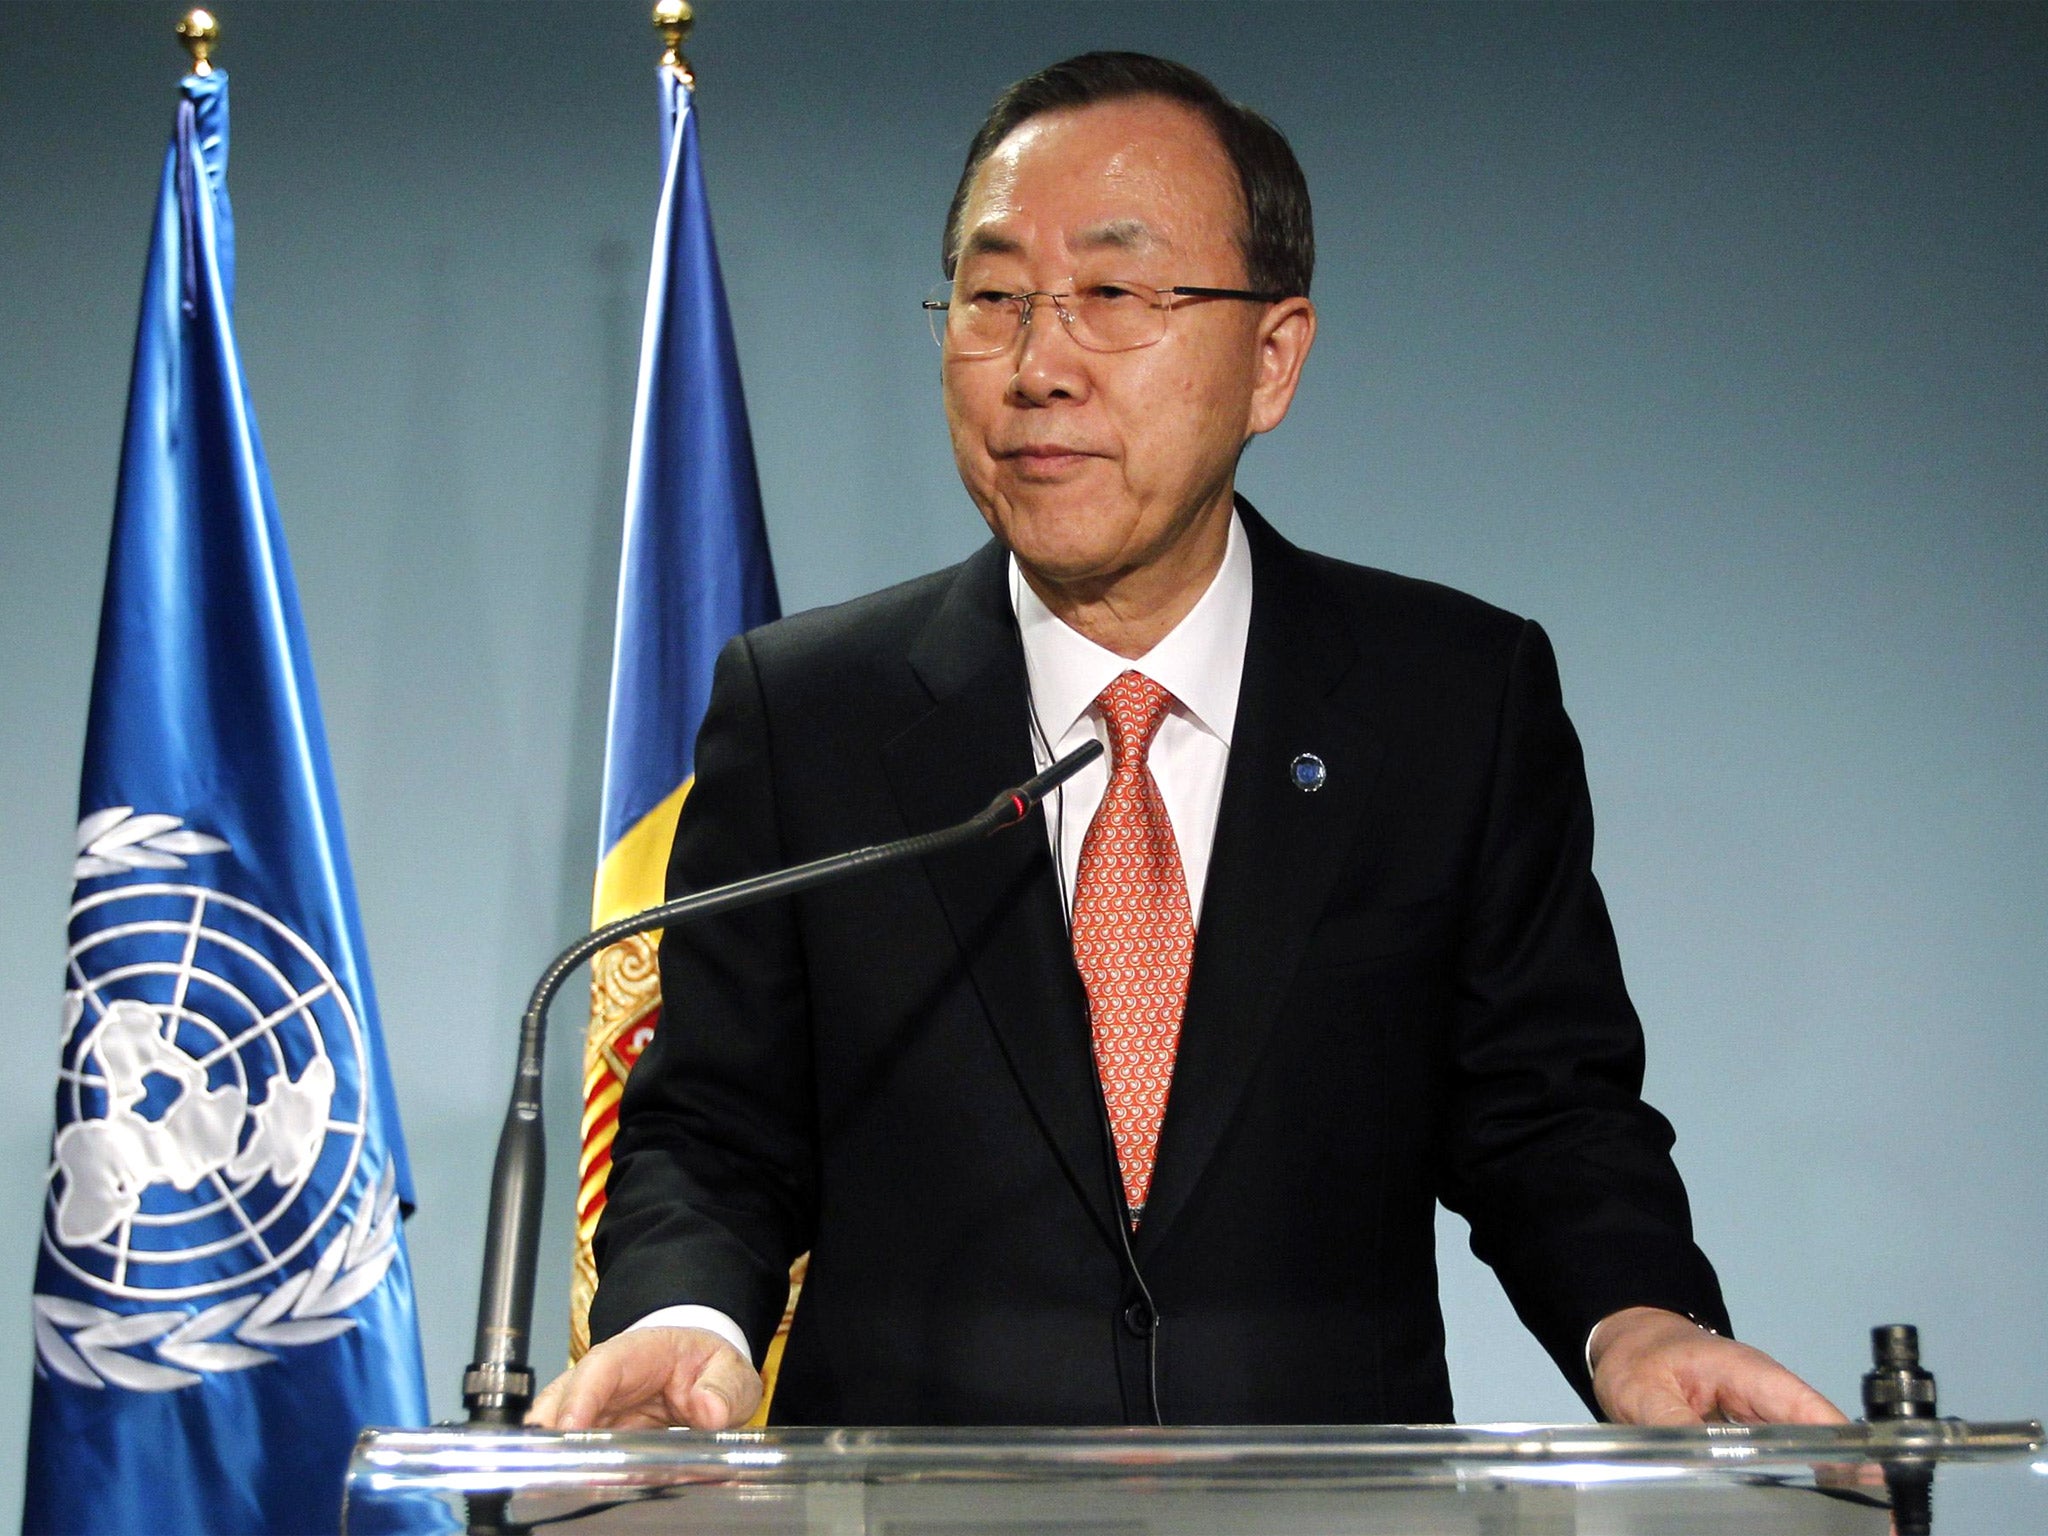 United Nations Secretary-General Ban Ki-moon speaks during a news conference in Andorra